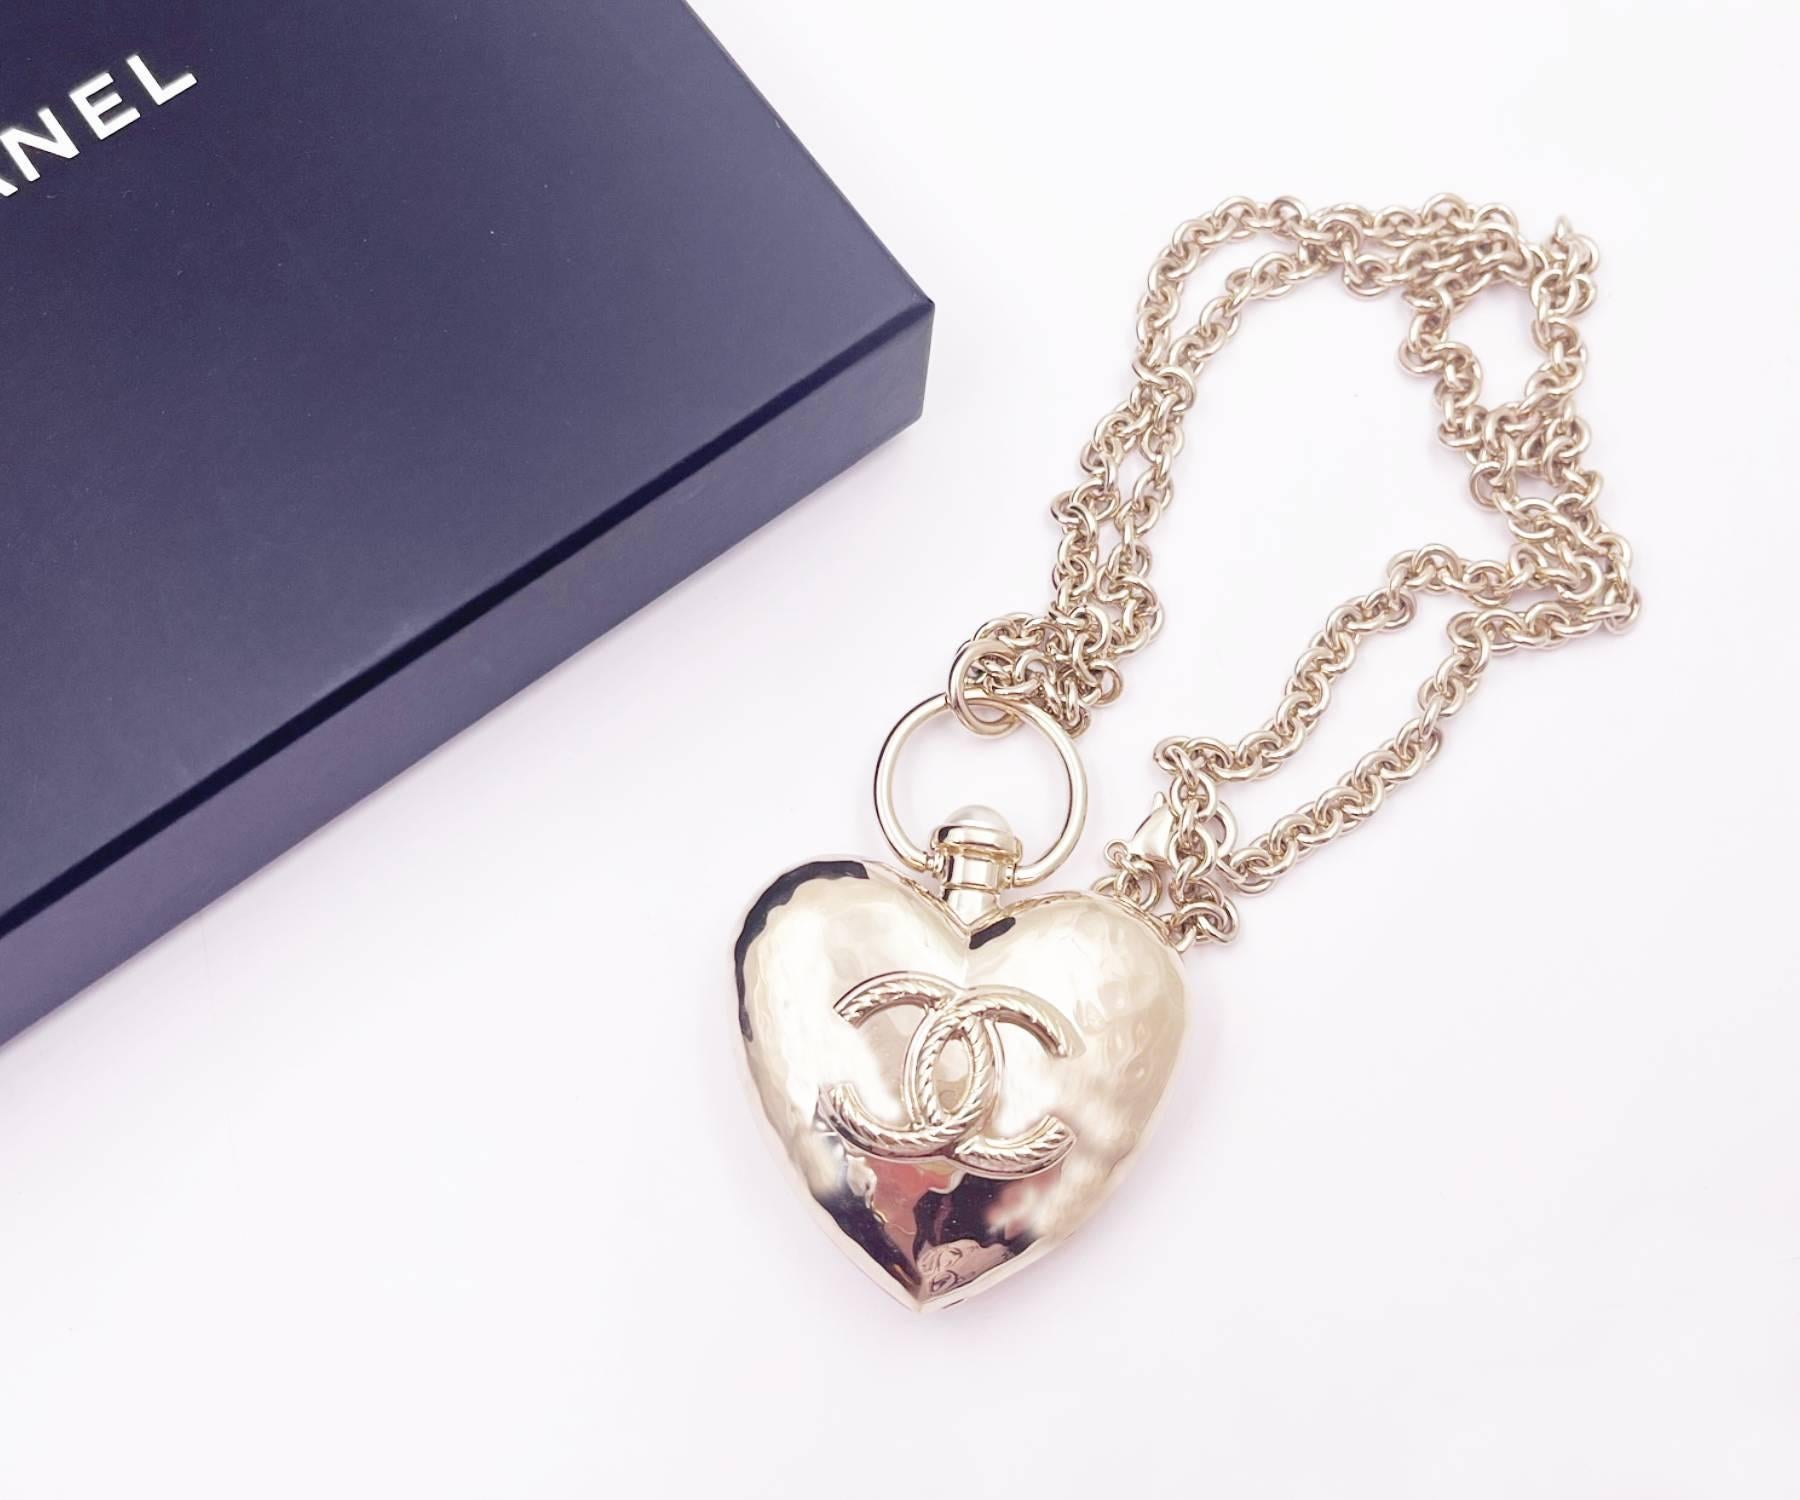 Chanel Gold CC Large Heart Locket Long Chain Necklace

* Marked 22
* Made in Italy
* Comes with the original box and pouch

-The pendant is approximately 3